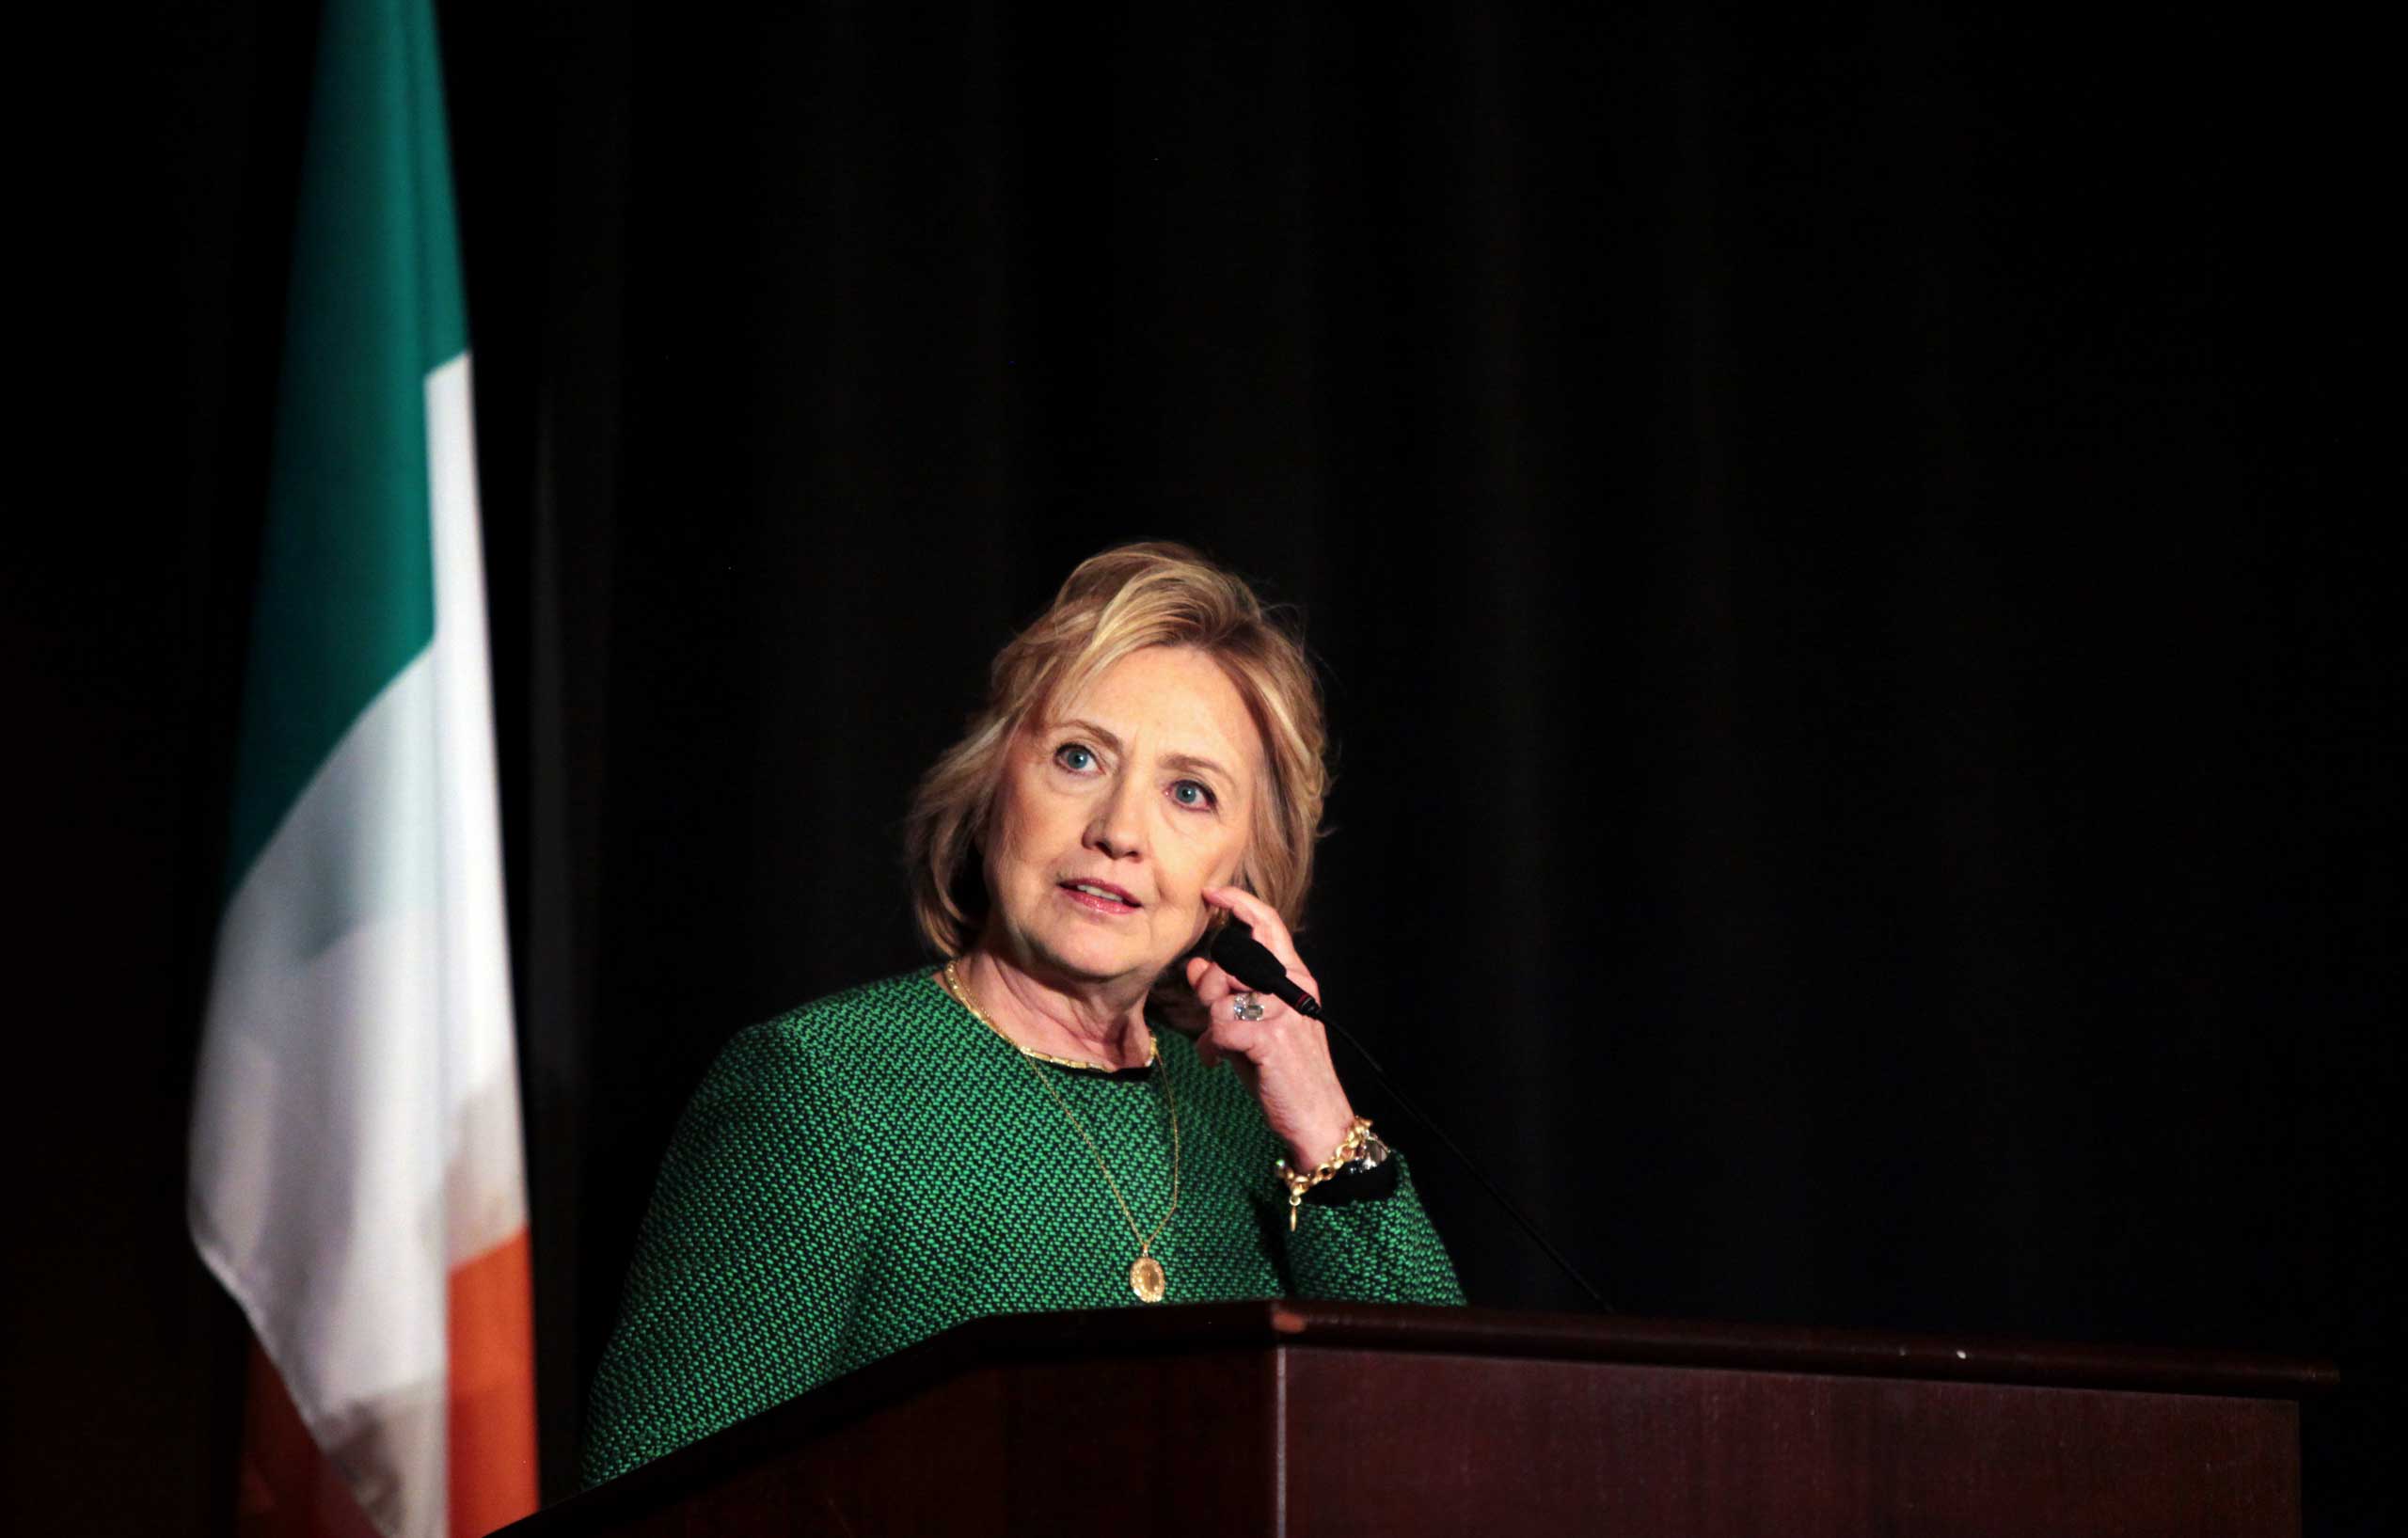 Former Secretary of State Hillary Clinton speaks on stage during a ceremony to induct her into the Irish America Hall of Fame on March 16, 2015 in New York City. (Yana Paskova—Getty Images)